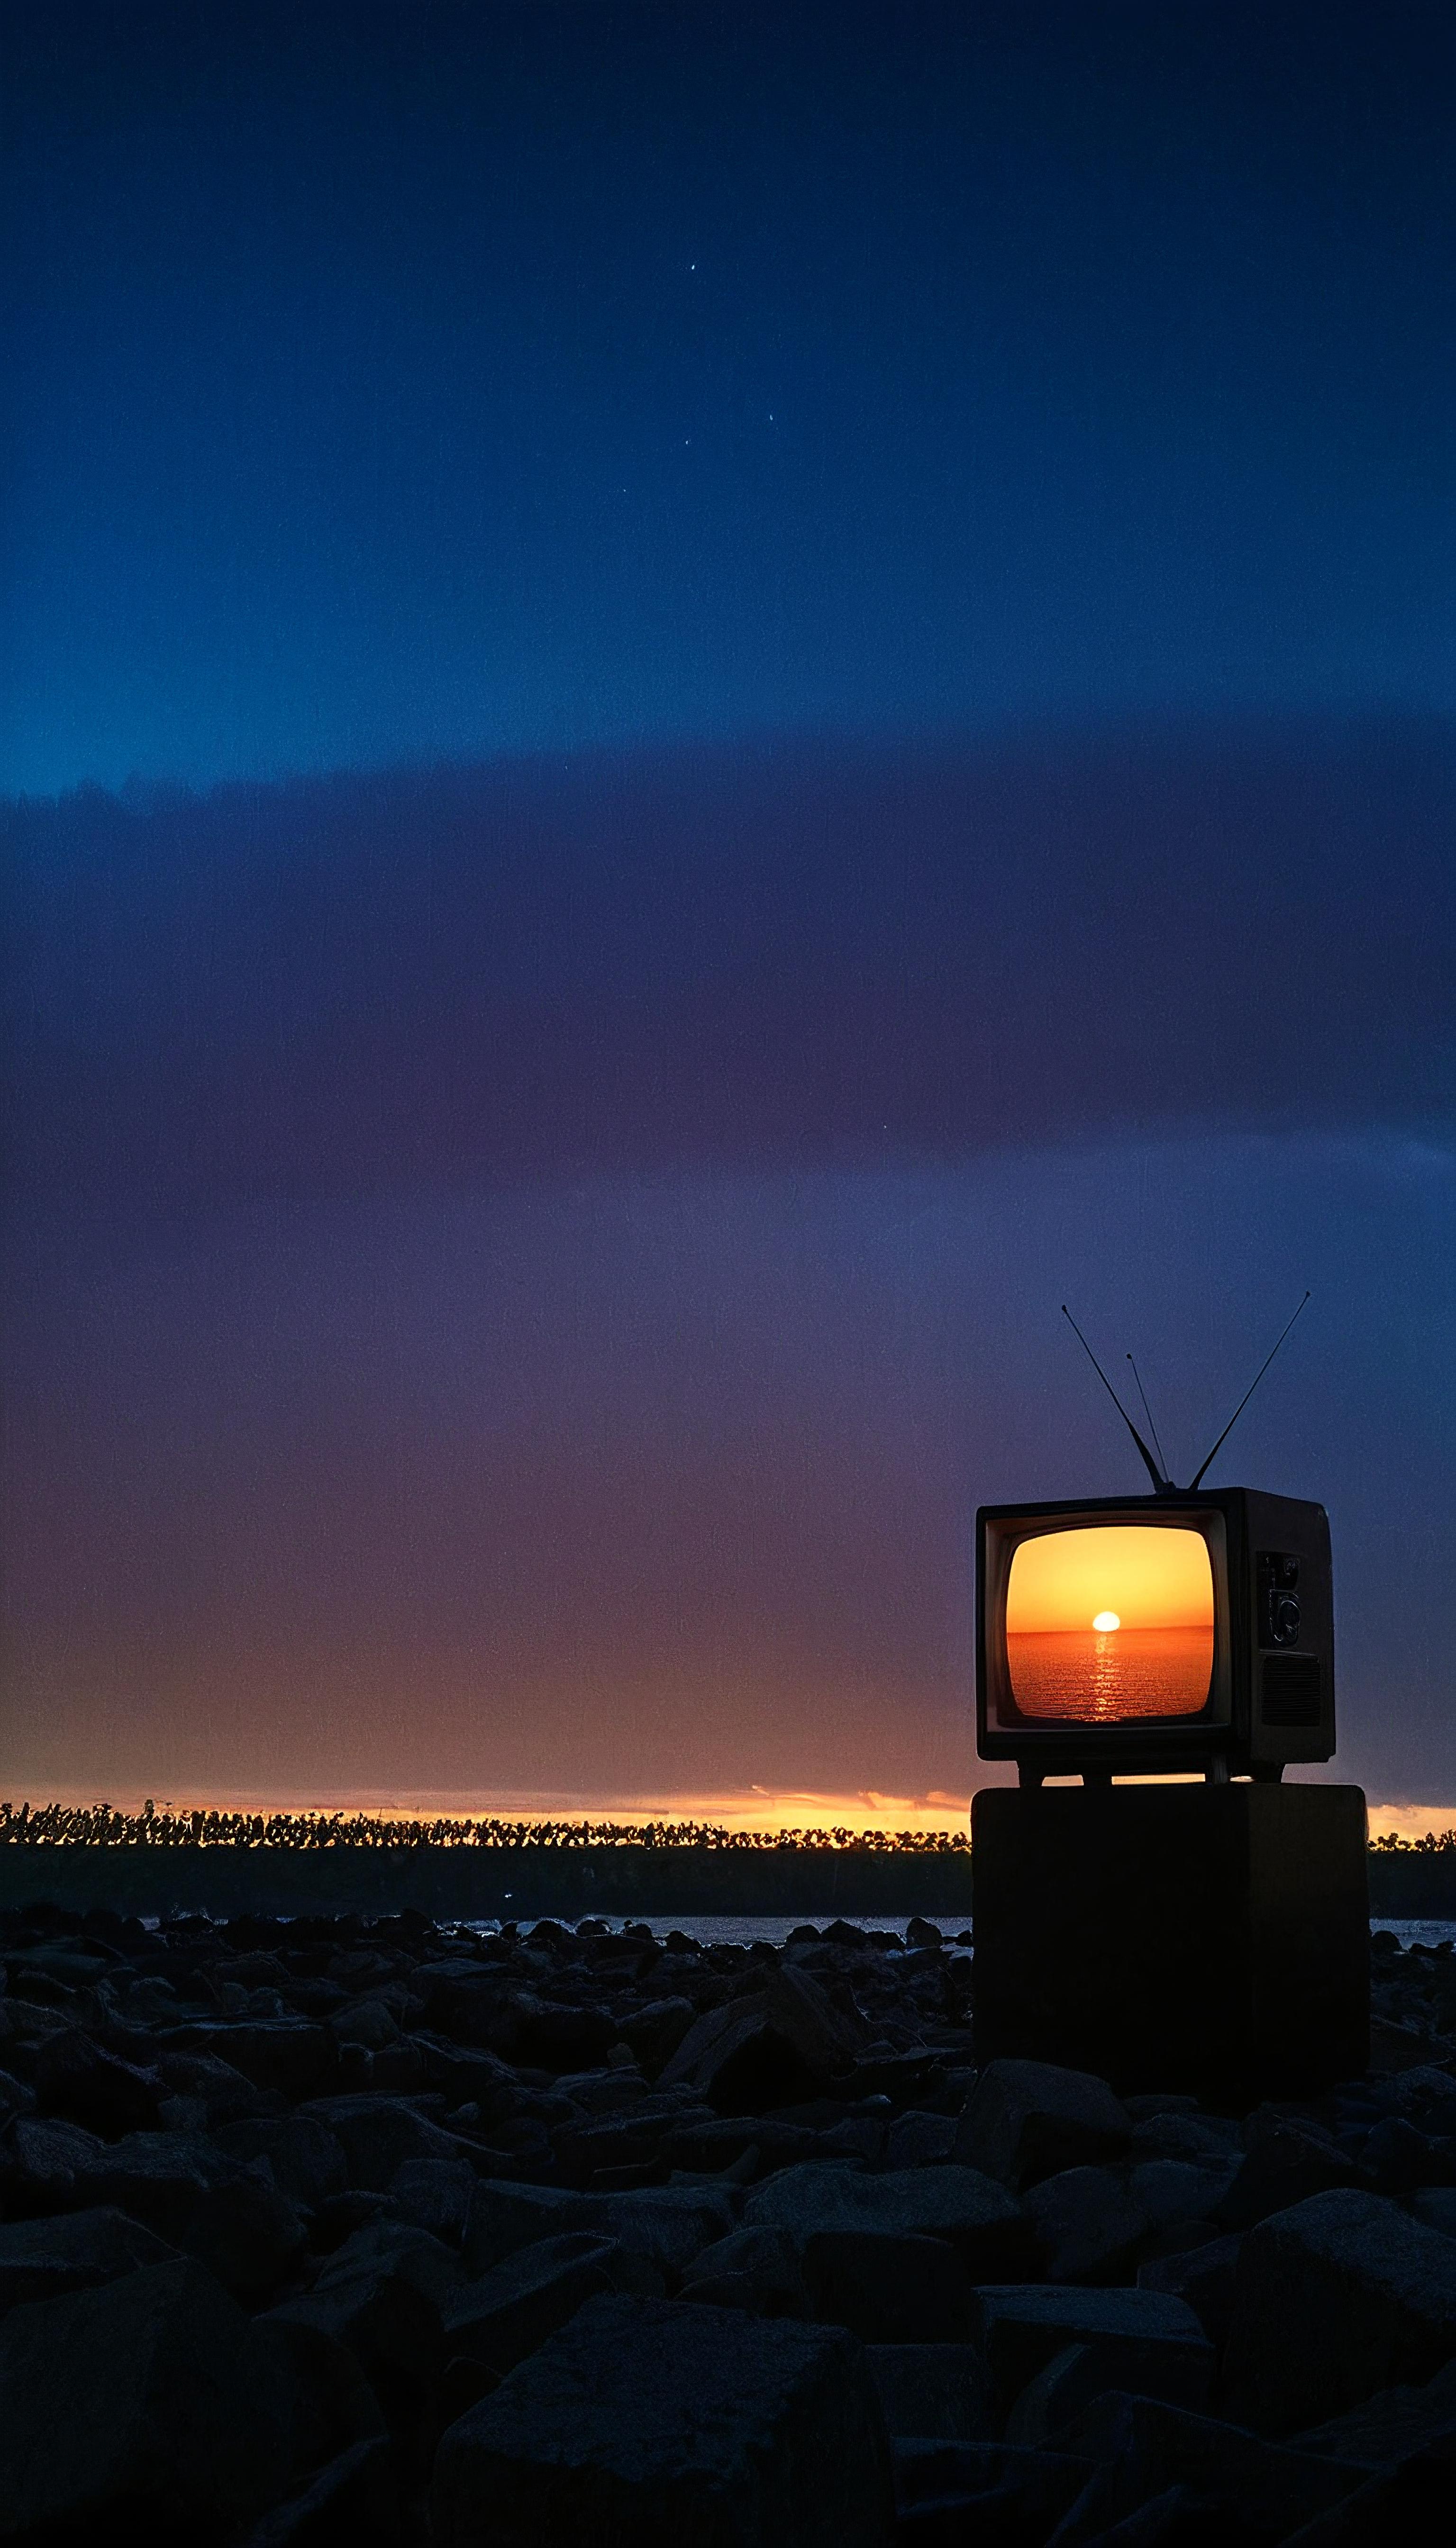 A TV with a beautiful sunset in the background.